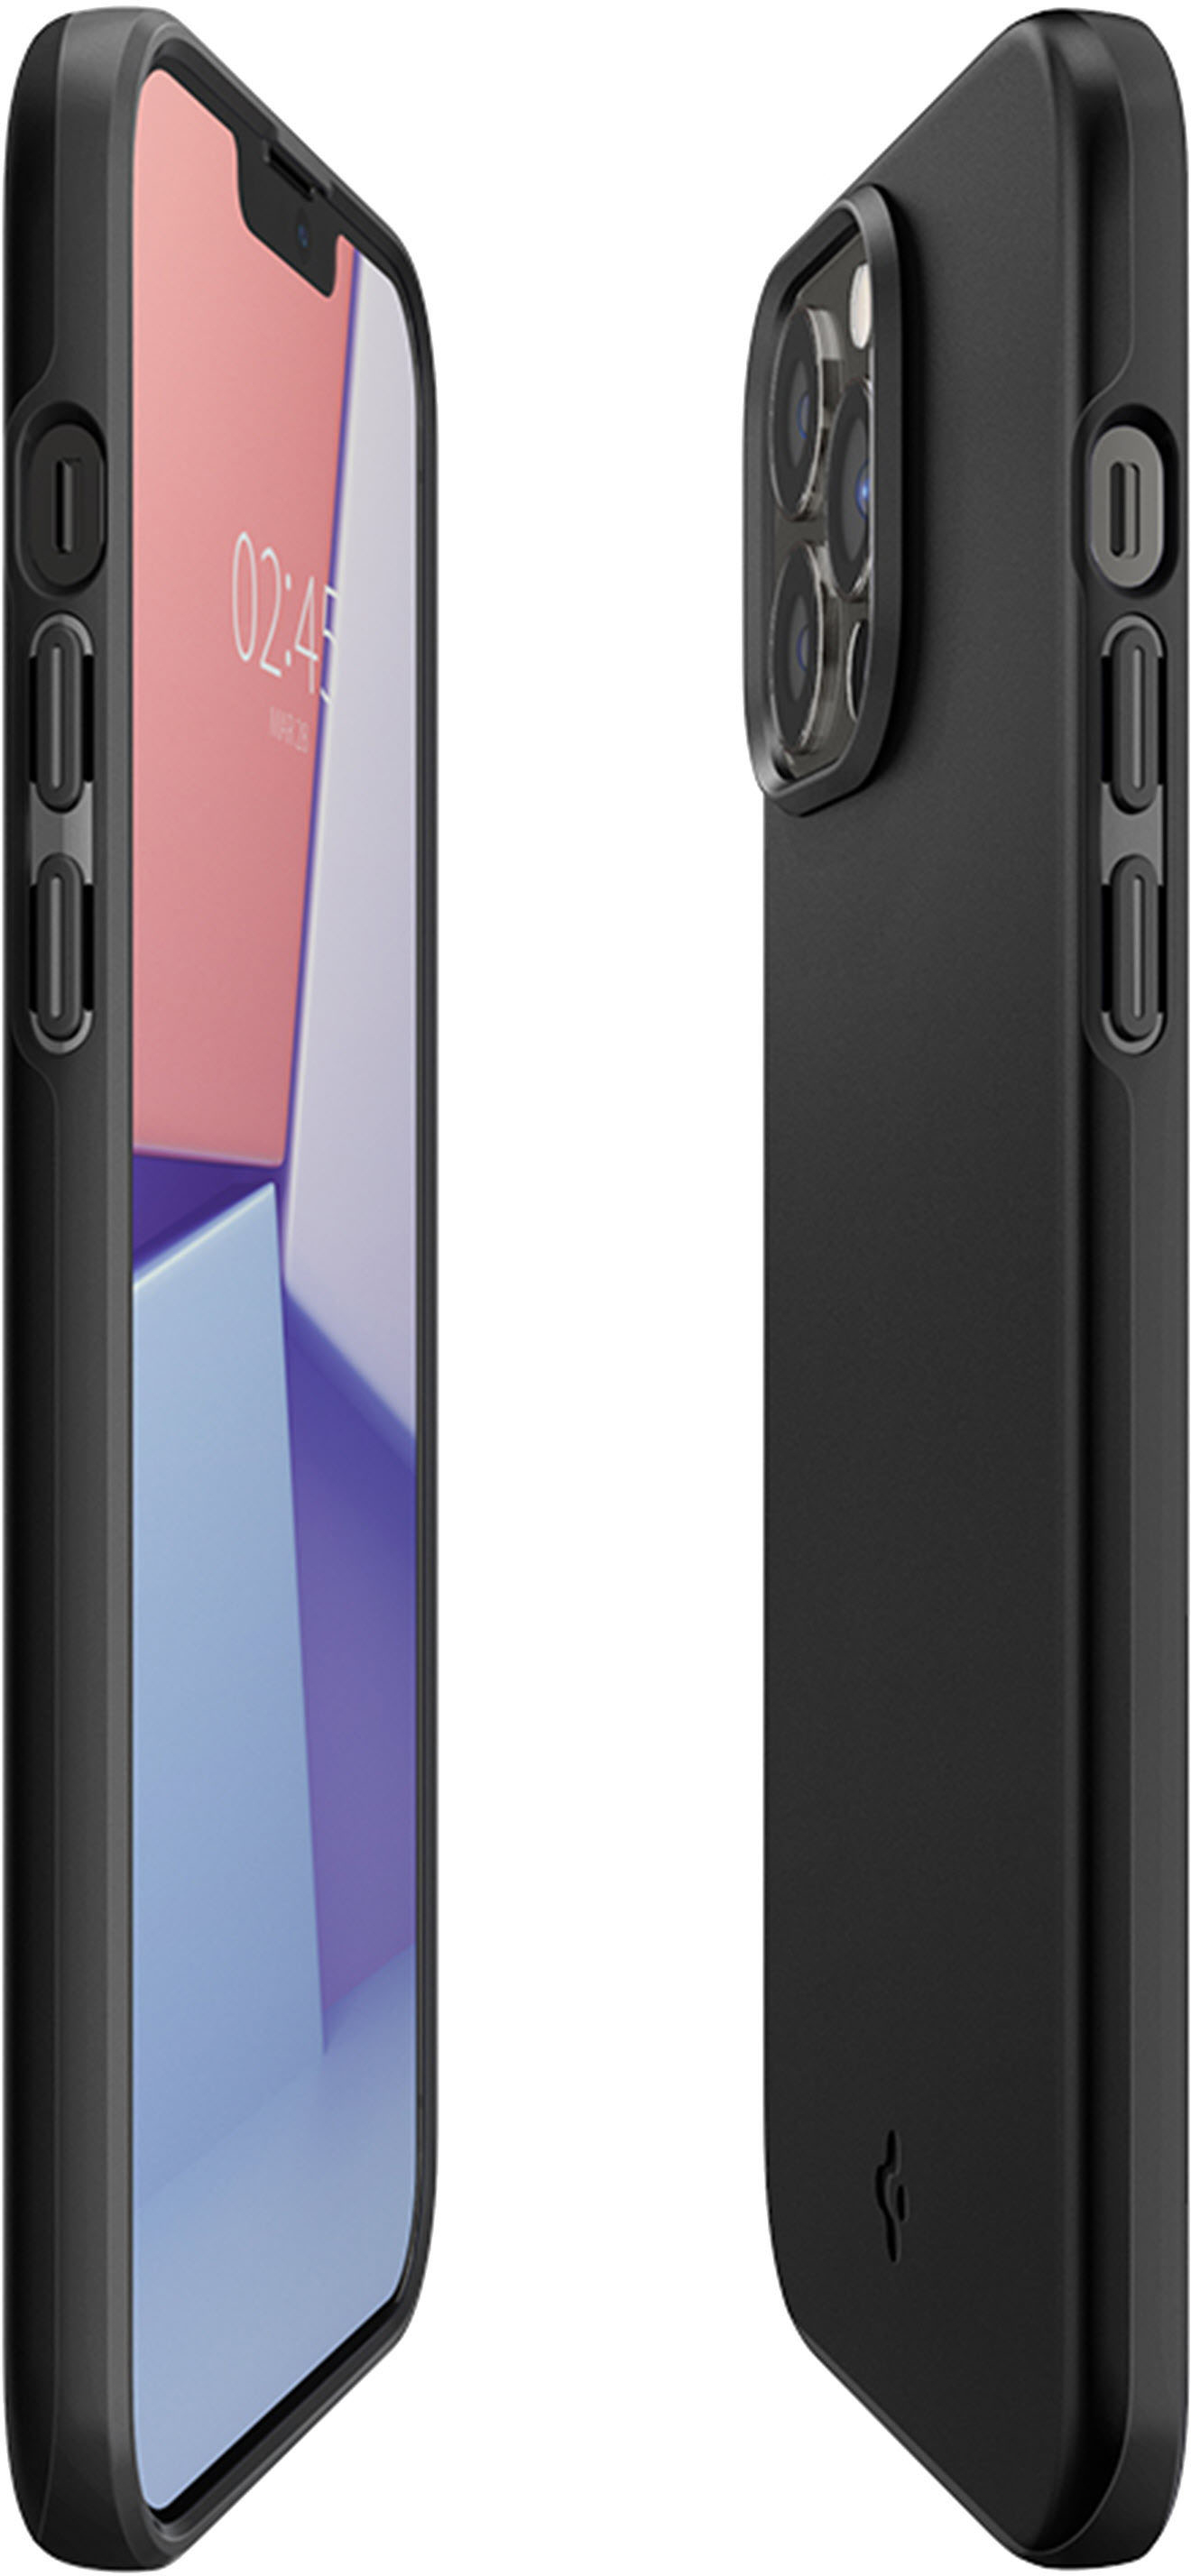 Spigen - Thin Fit Hard Shell Case for Apple iPhone 13 Pro Max & iPhone 12 Pro Max - Black